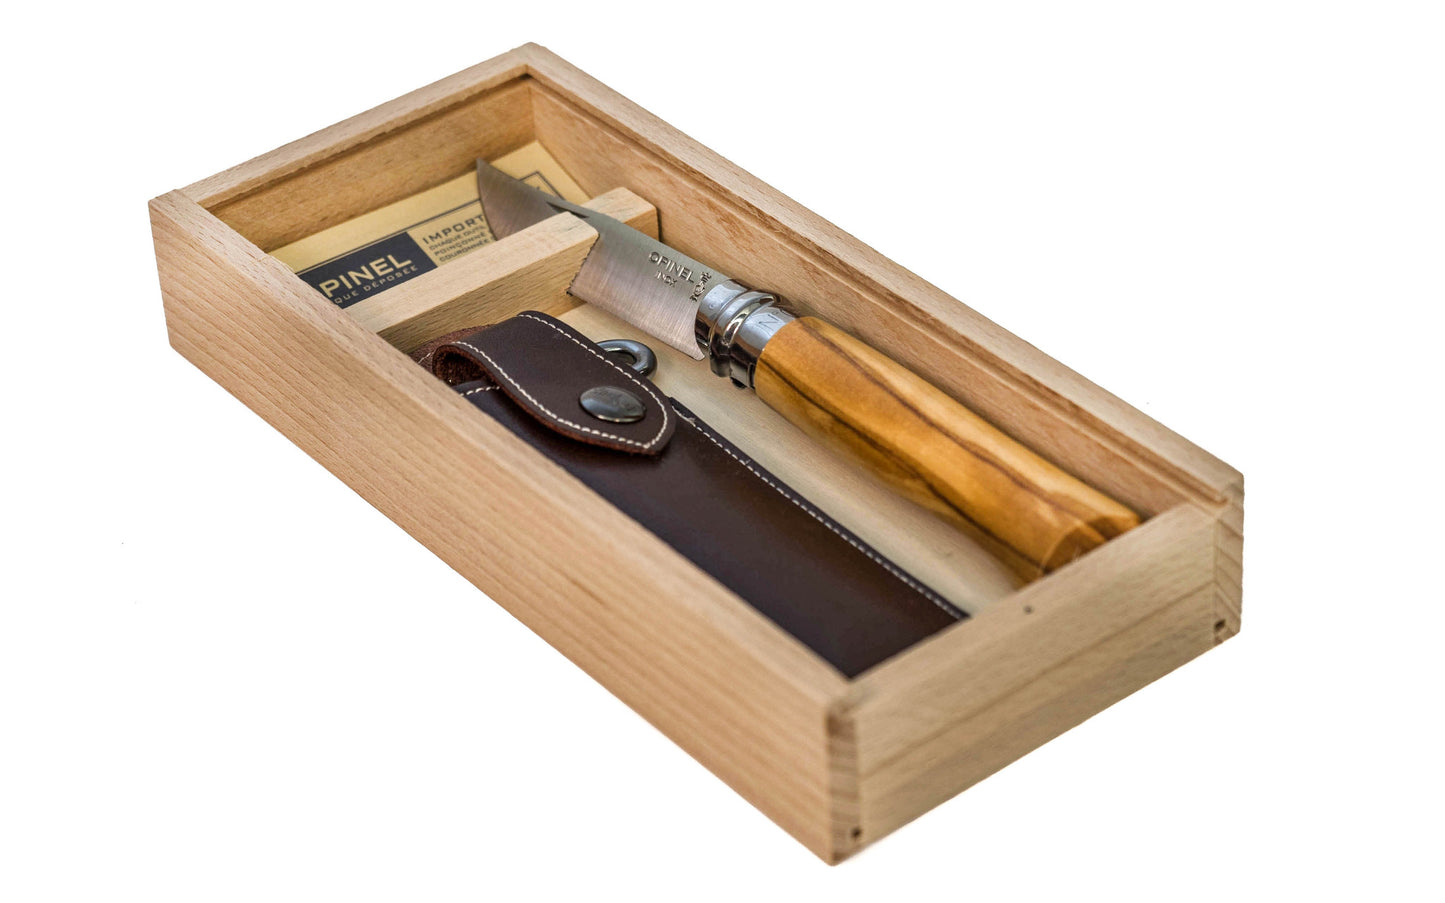 Opinel Stainless Steel Knife Gift Box Set ~ Olive Wood Handle ~Made in France ~ 3-1/4" long foldable blade with locking collar ~ Made of 12c27 Sandvik stainless steel ~ Includes a synthetic leather sheath in gift box set